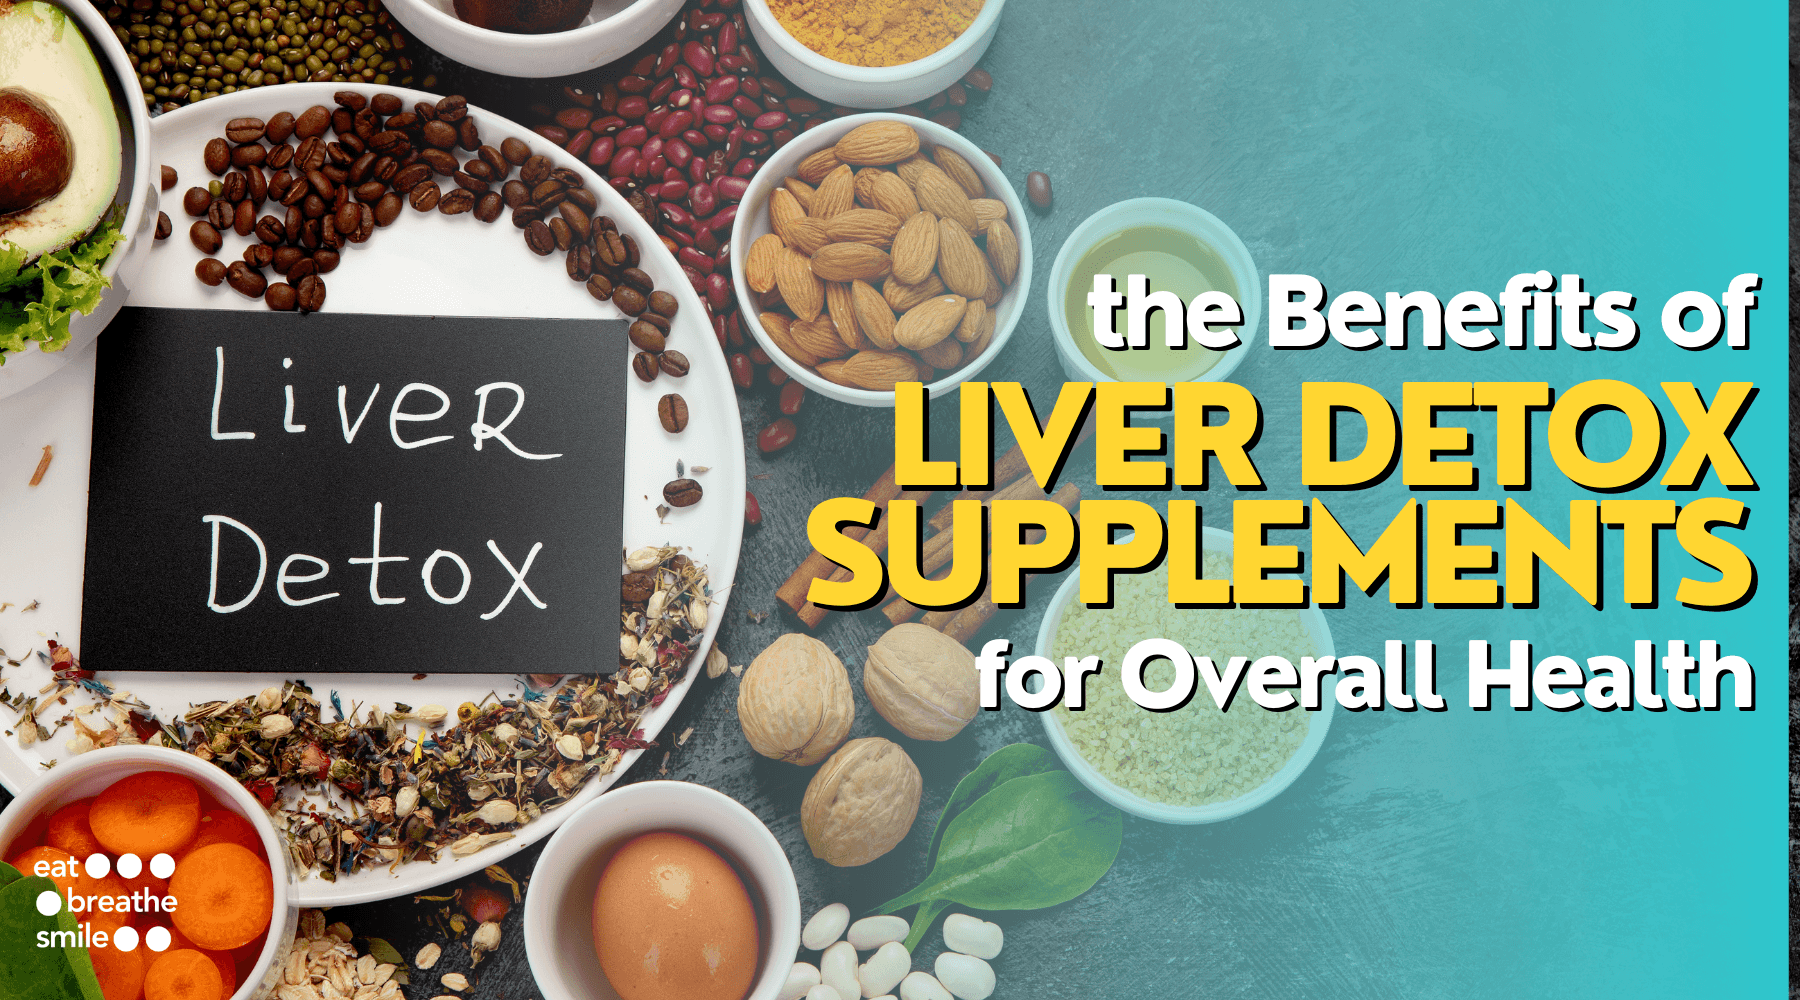  Liver Detox Supplements for Overall Health